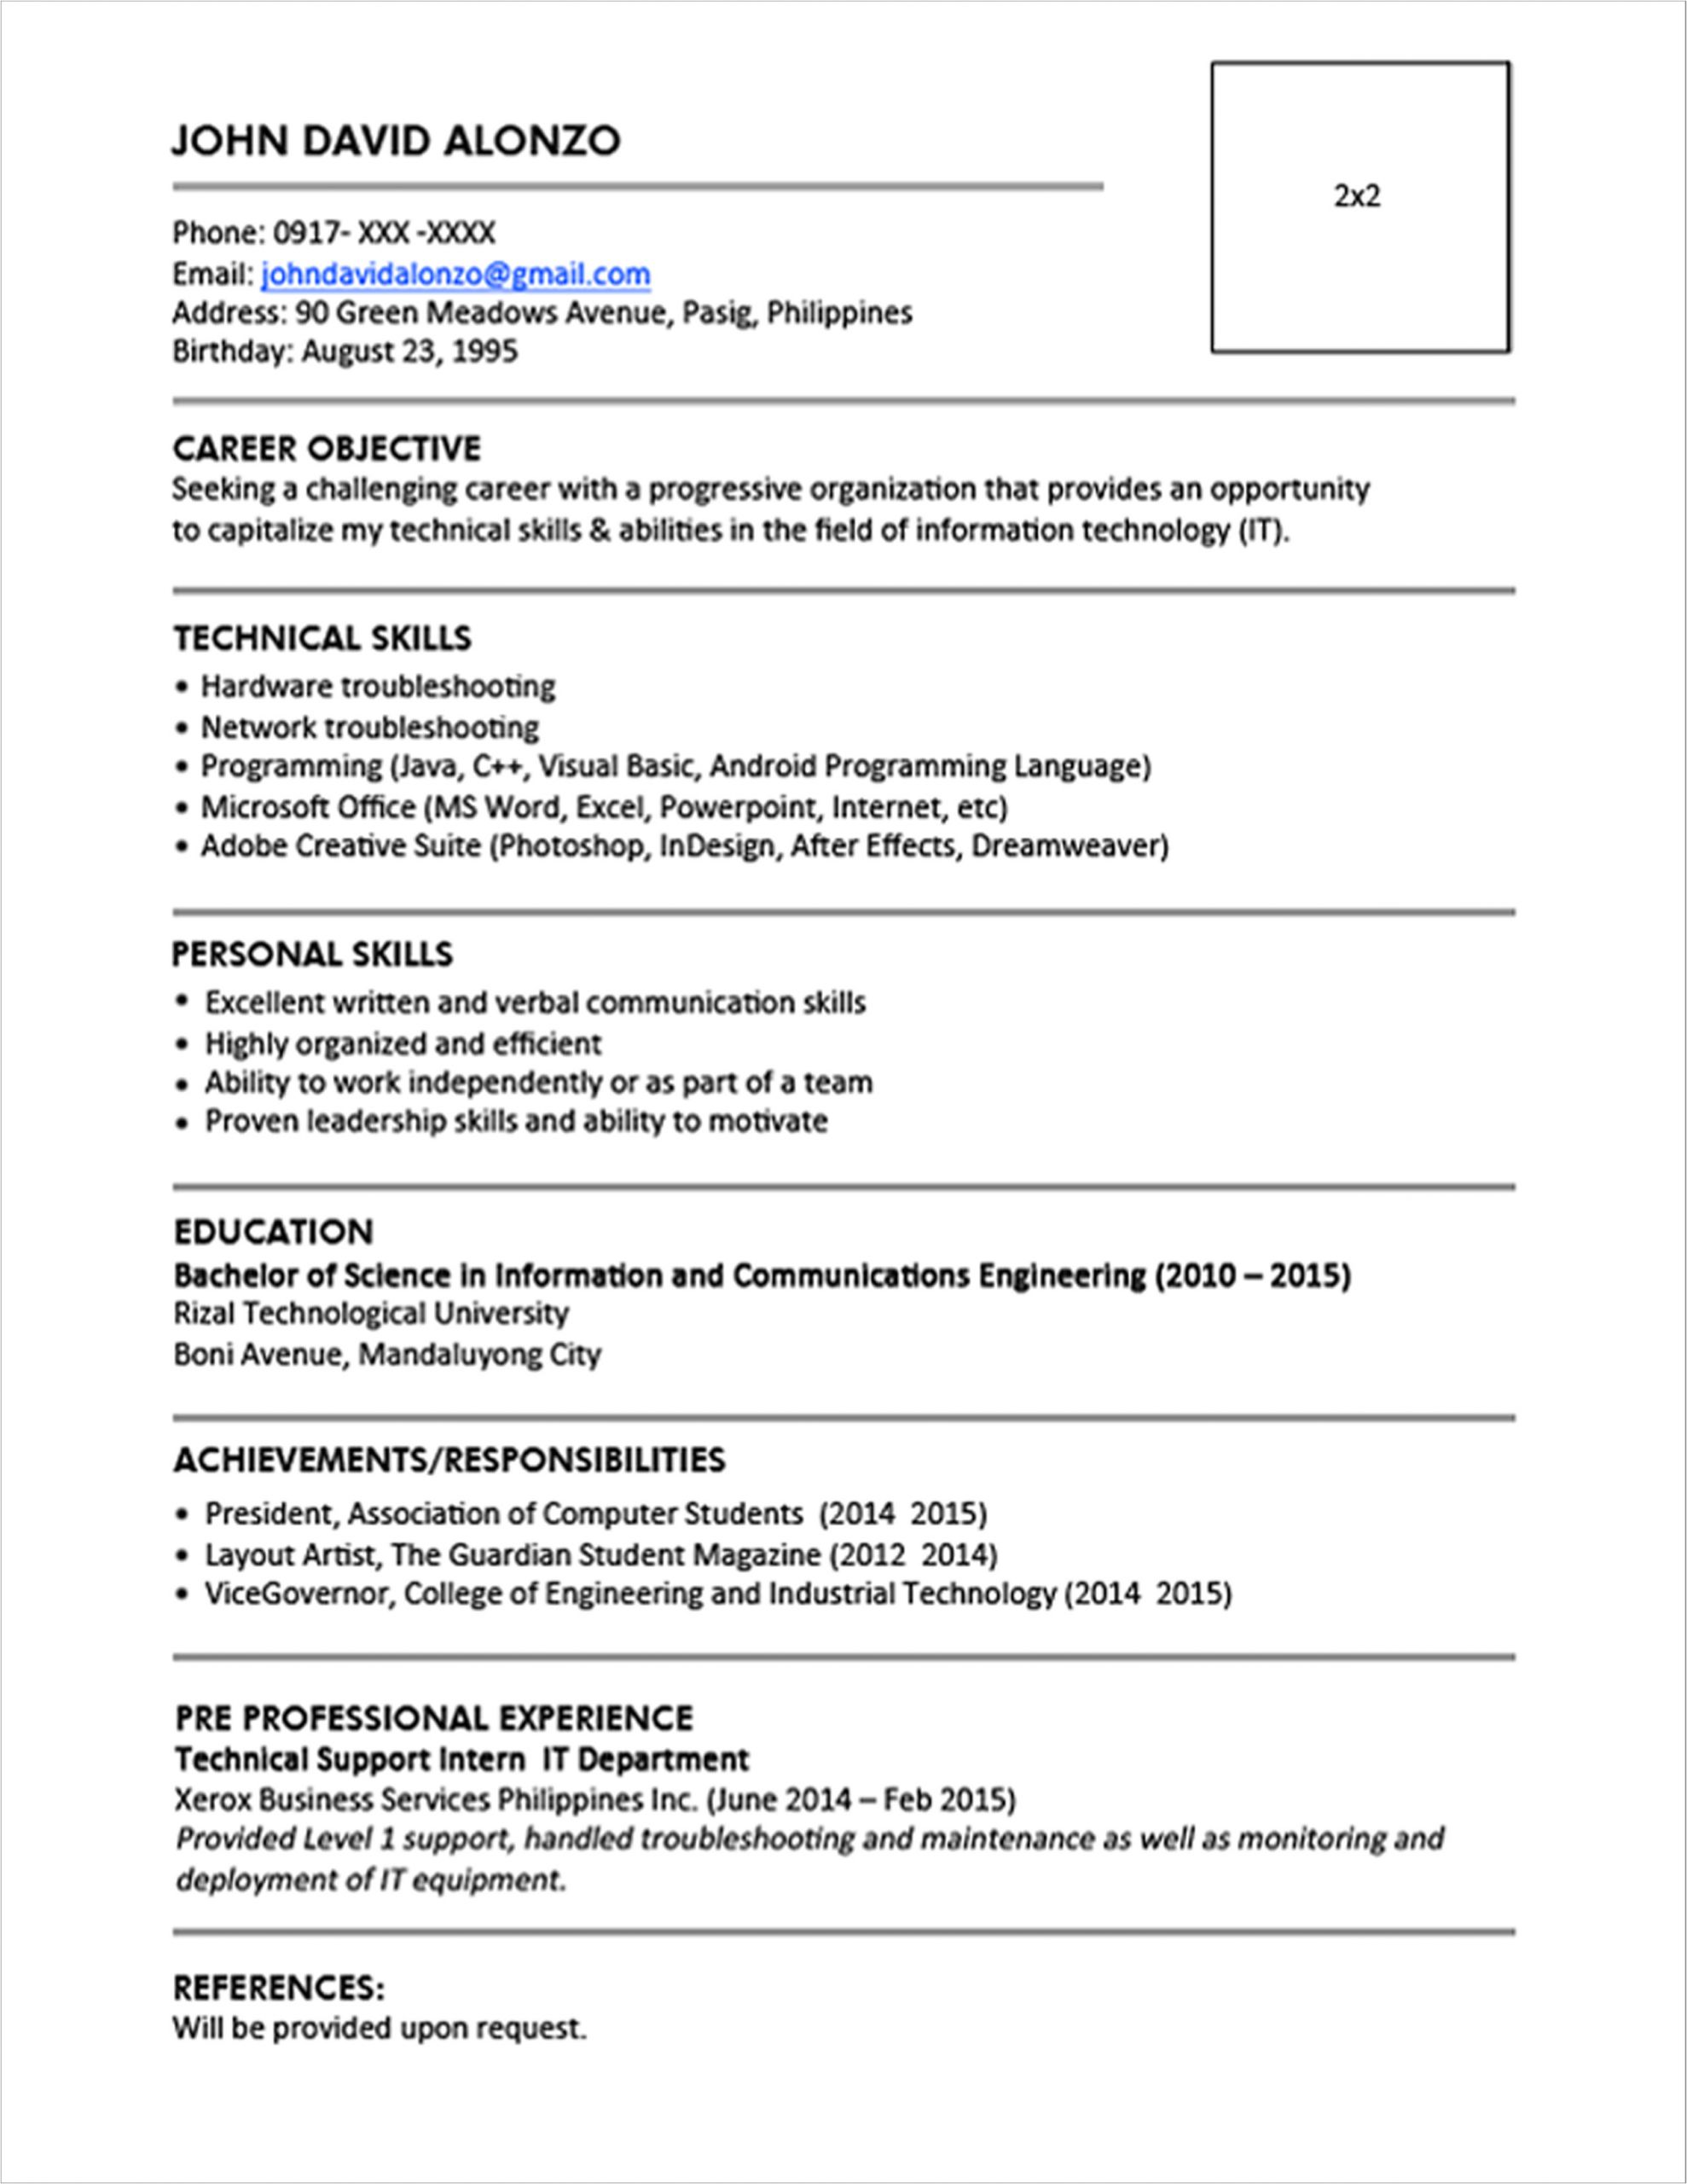 resume template download philippines